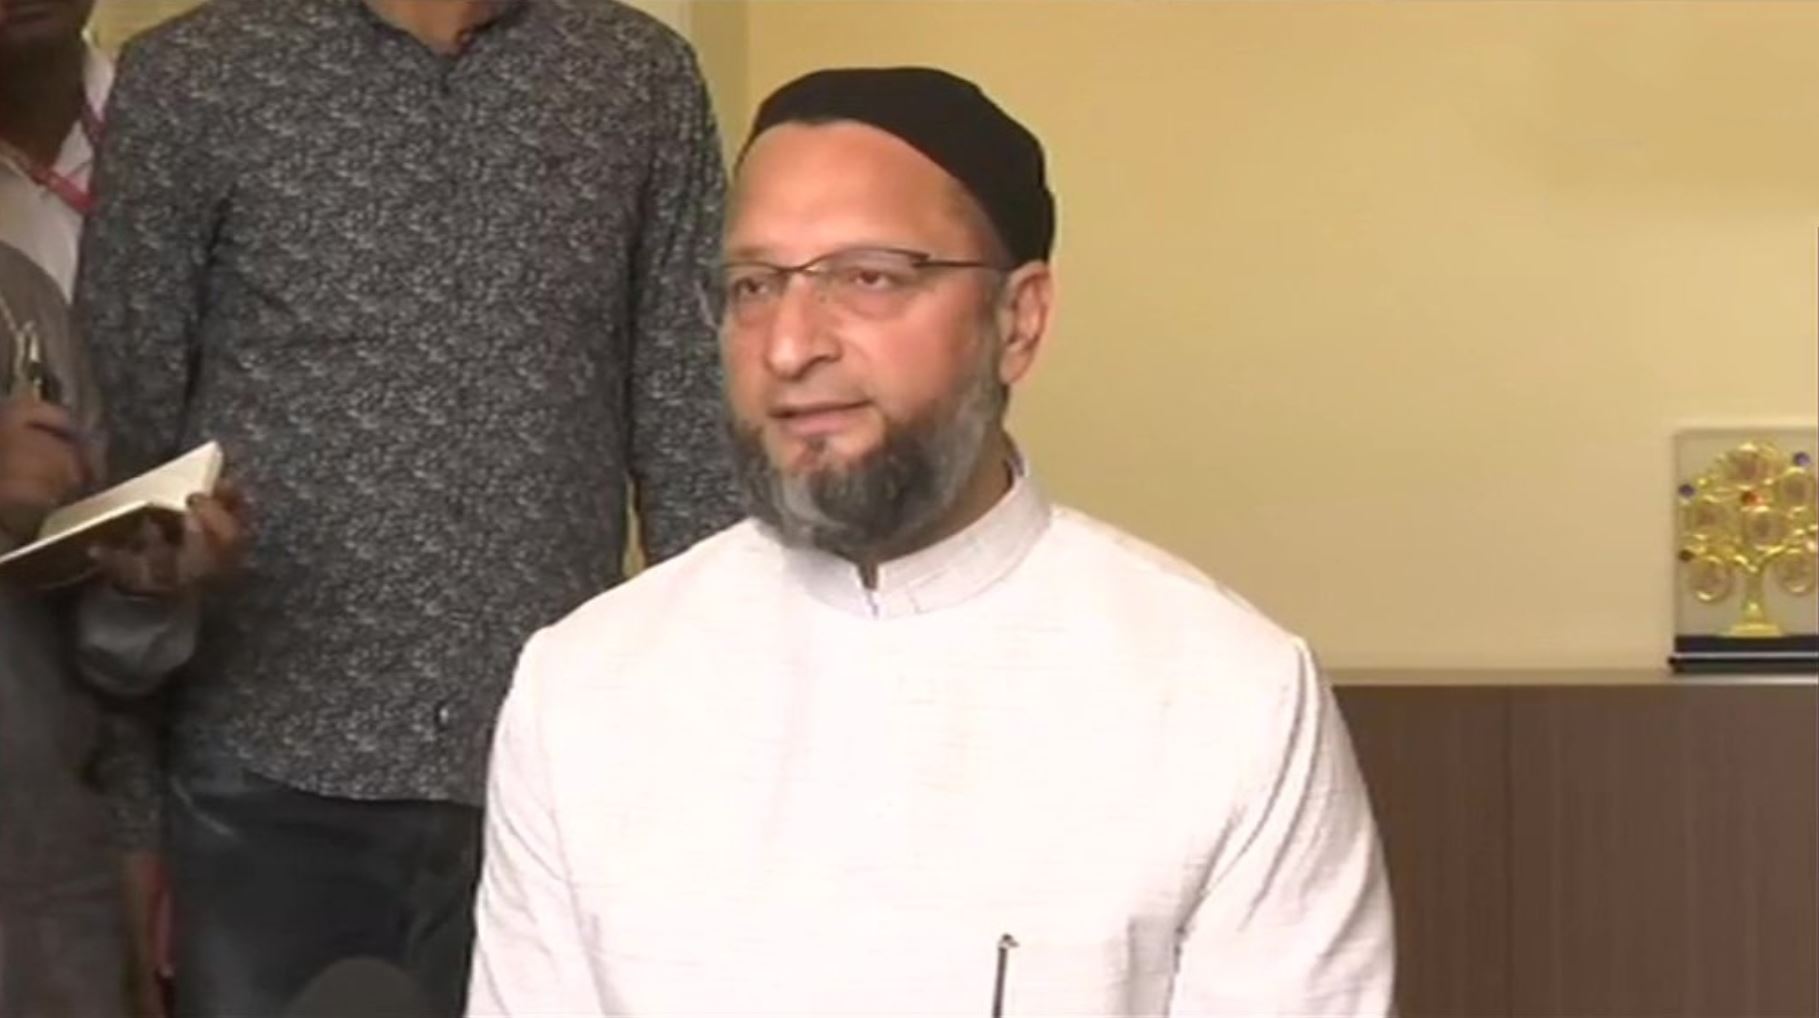 Top court is supreme, but not infallible: Owaisi on Ayodhya verdict